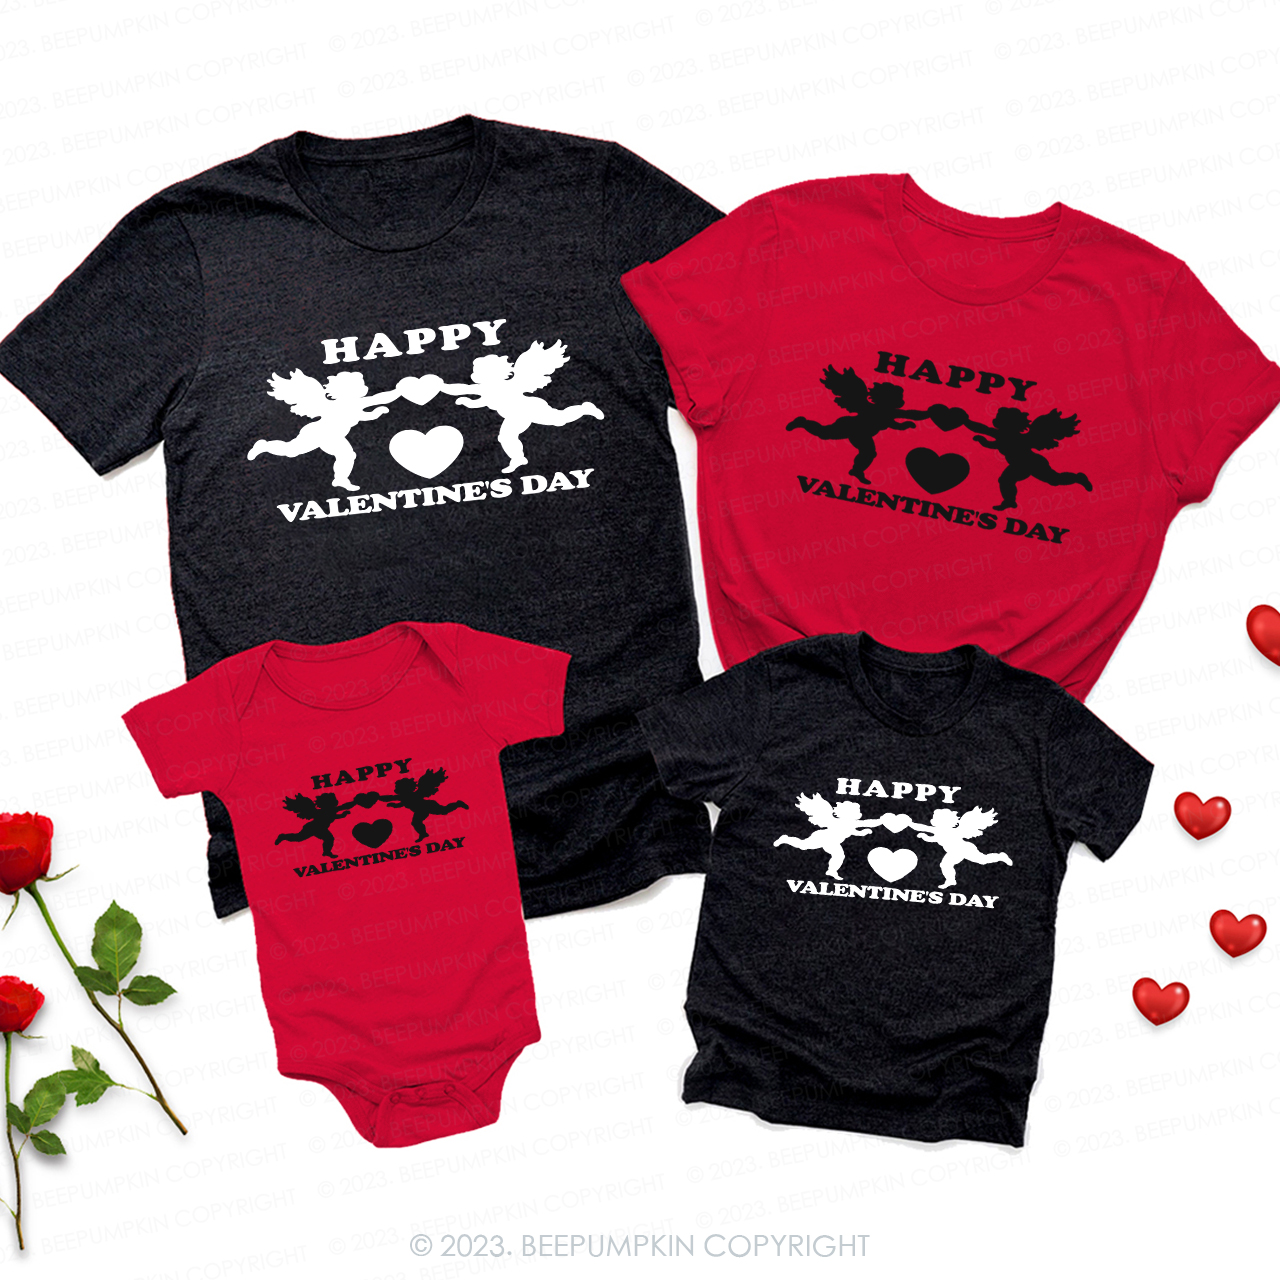 The Arrival and Encounter of Cupid Valentine Family Matching Shirts